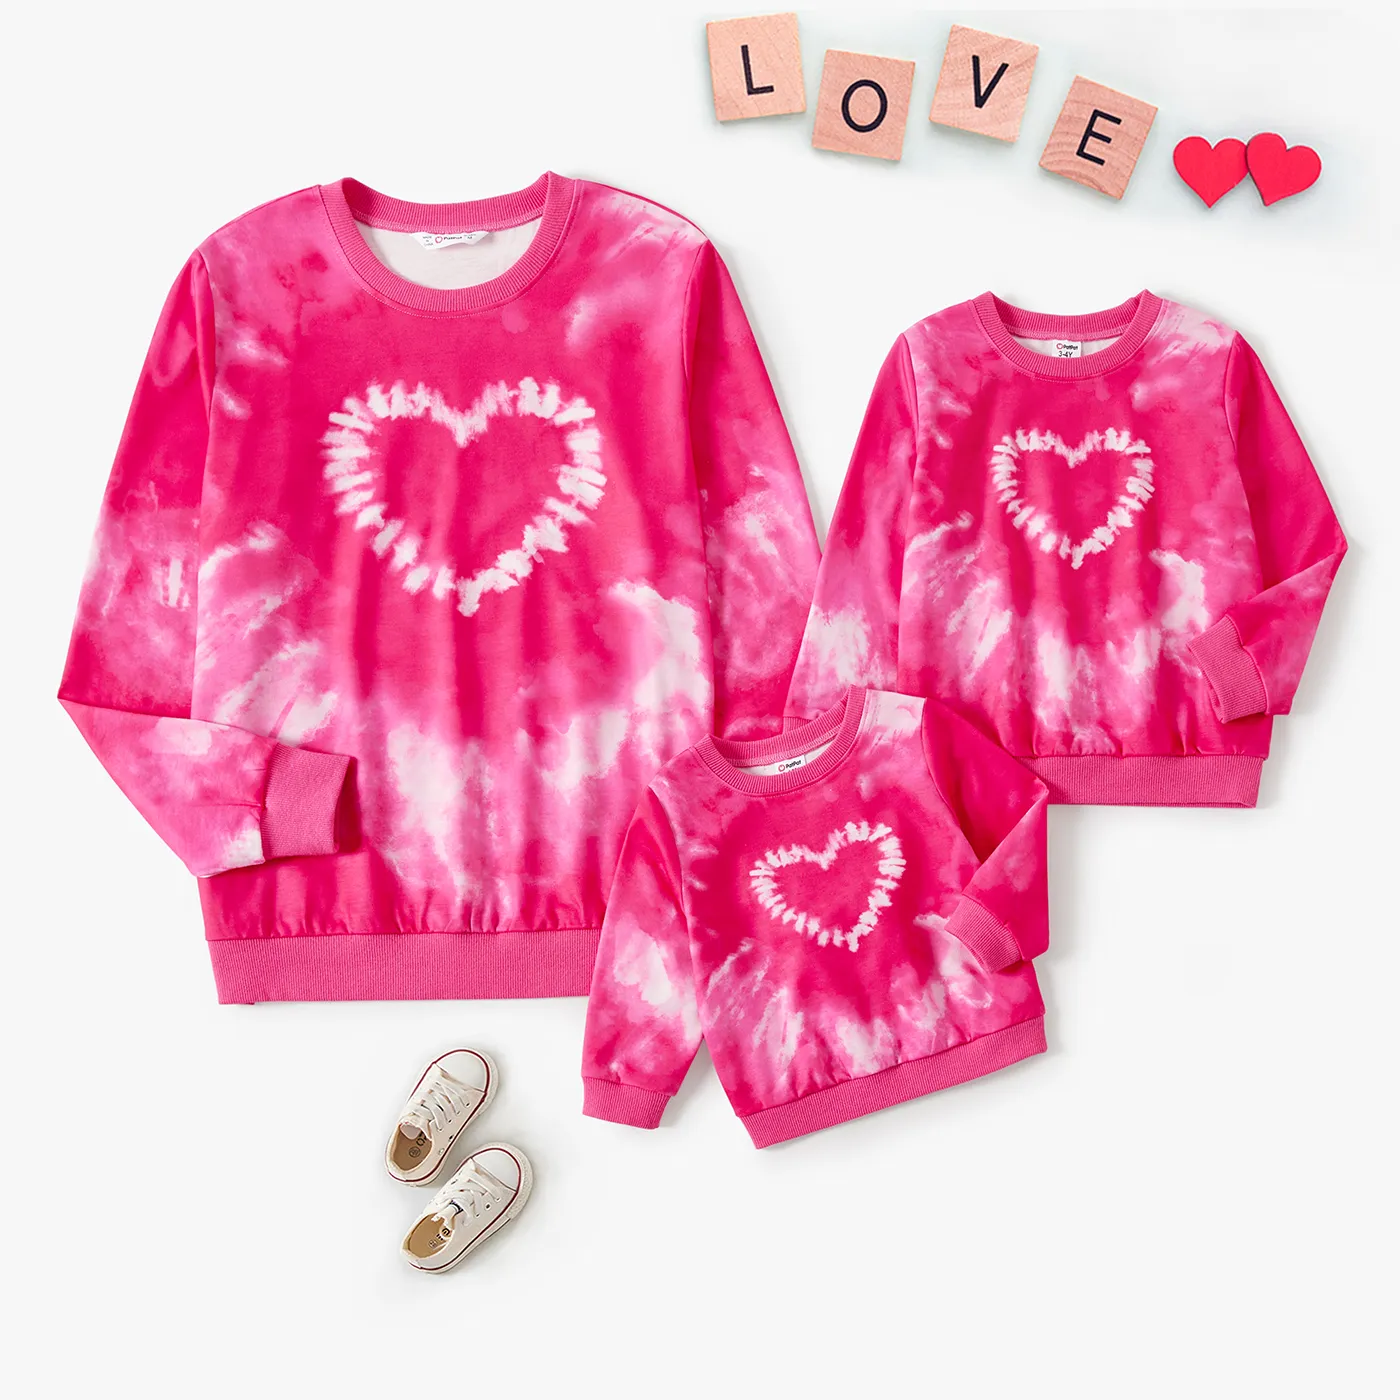 

Mommy and Me Sweet Pink Tie-dye Heart Print Long-sleeve Tops